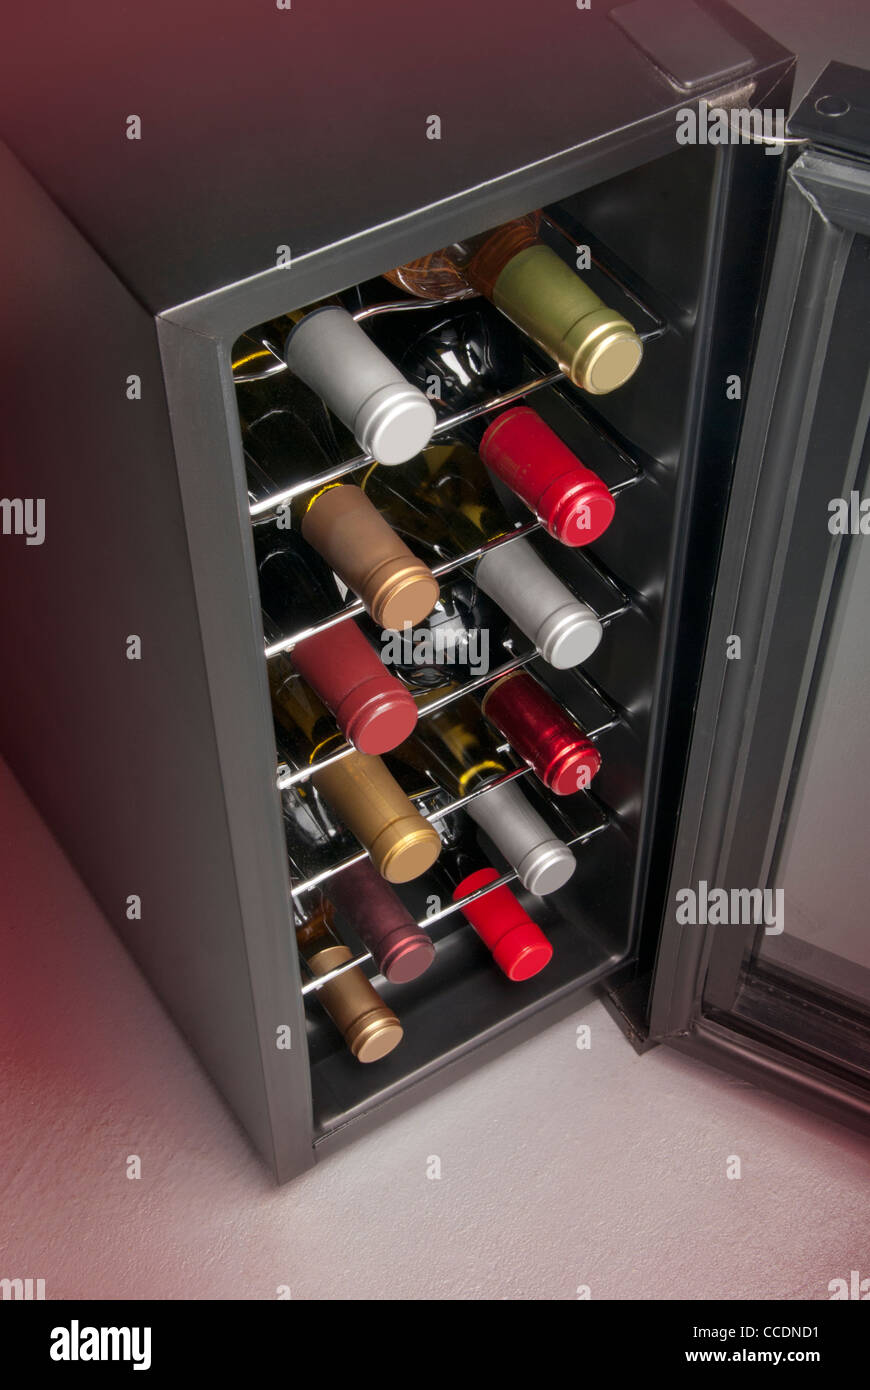 Wine cooler in home basement Stock Photo